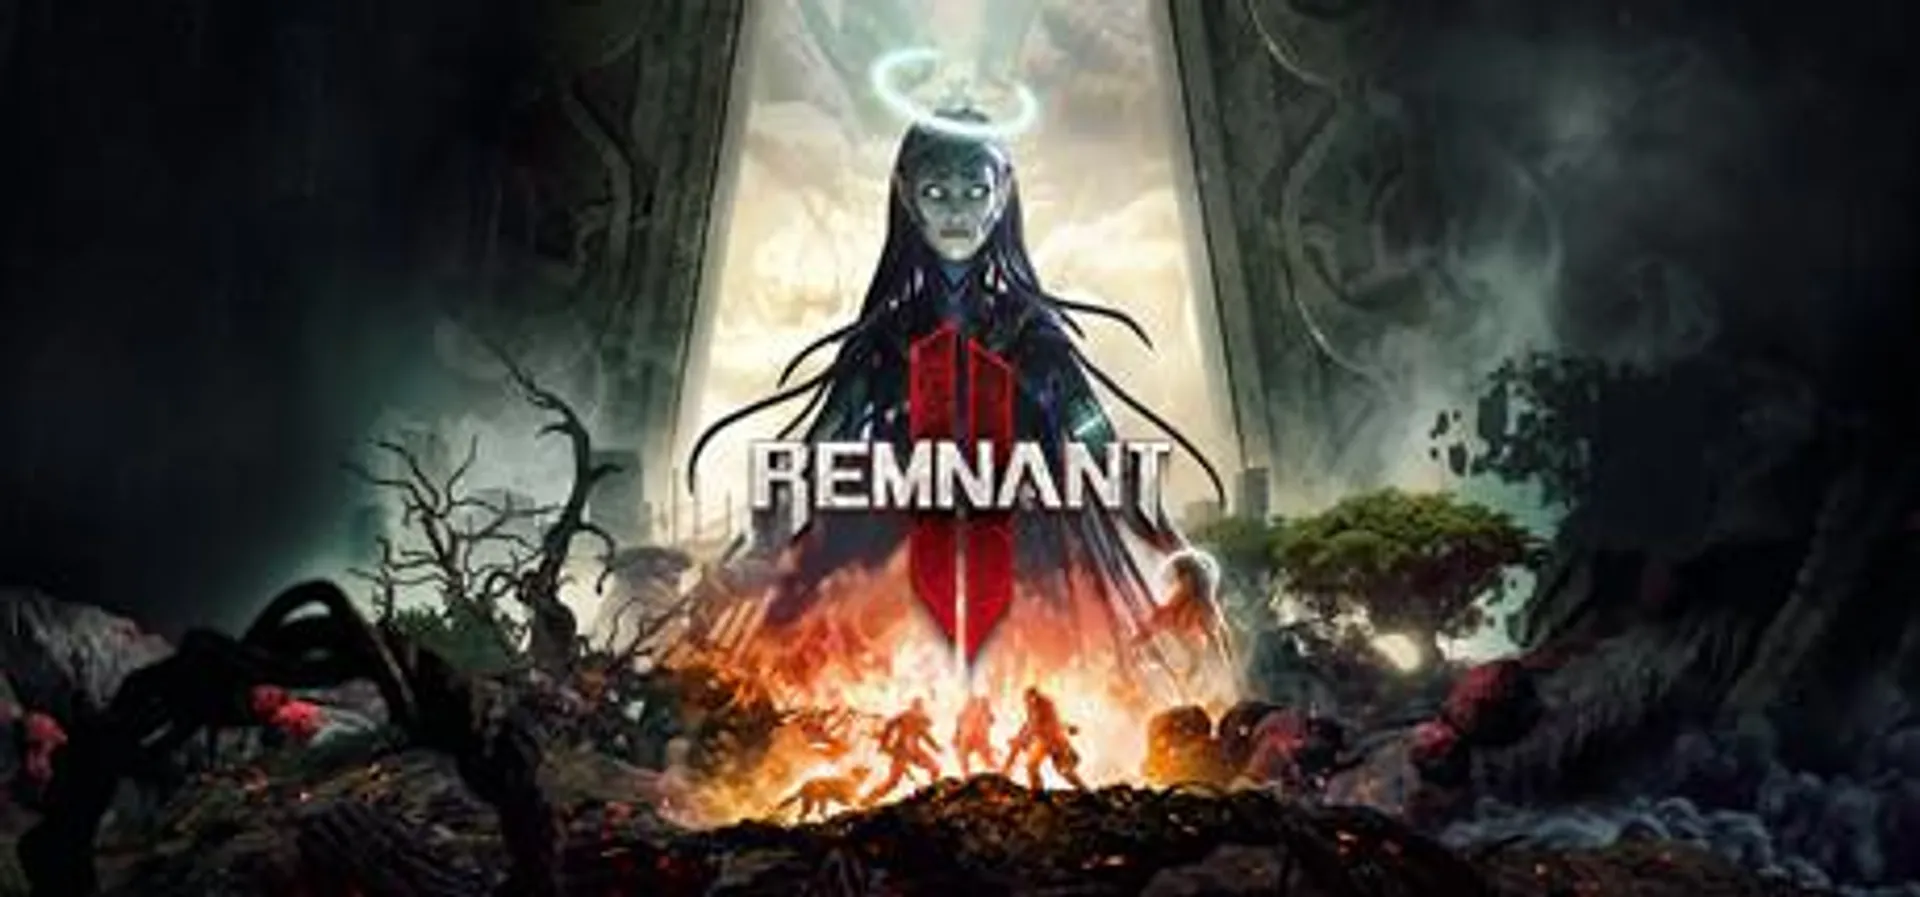 Save 40% on Remnant II on Steam